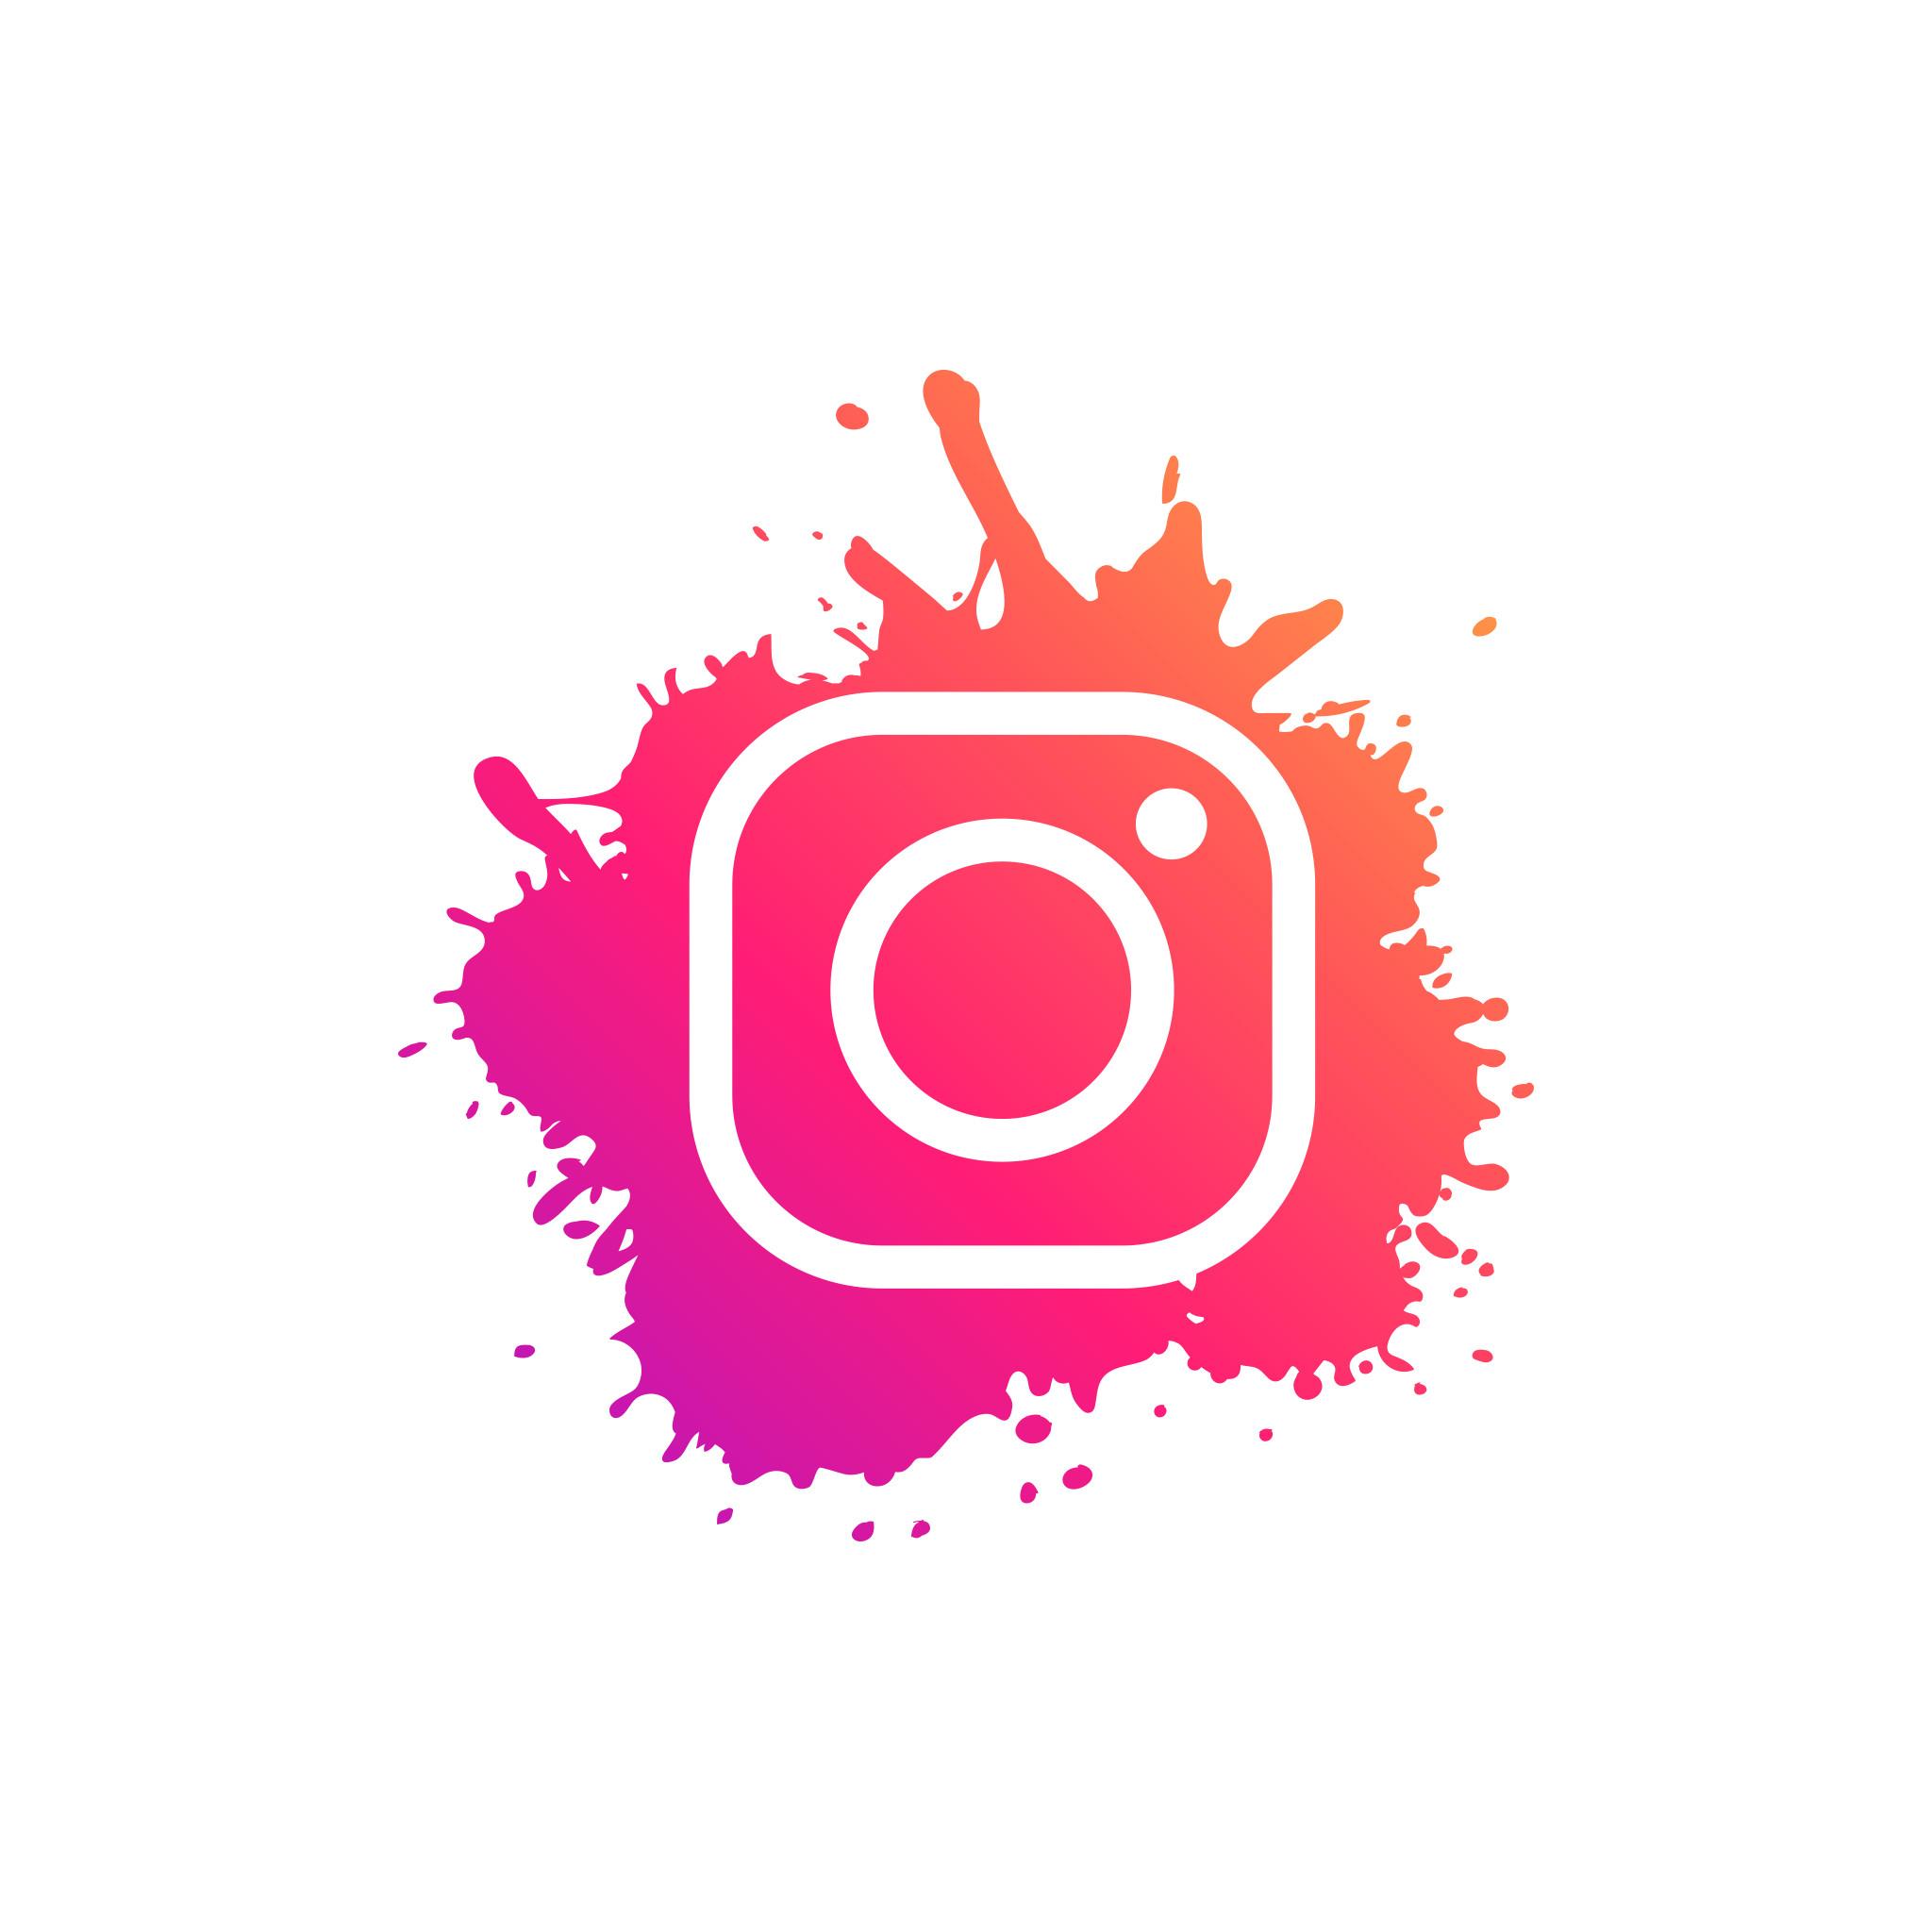 Cover Image for 7 Post Ideas To Entertain Your Instagram Audience